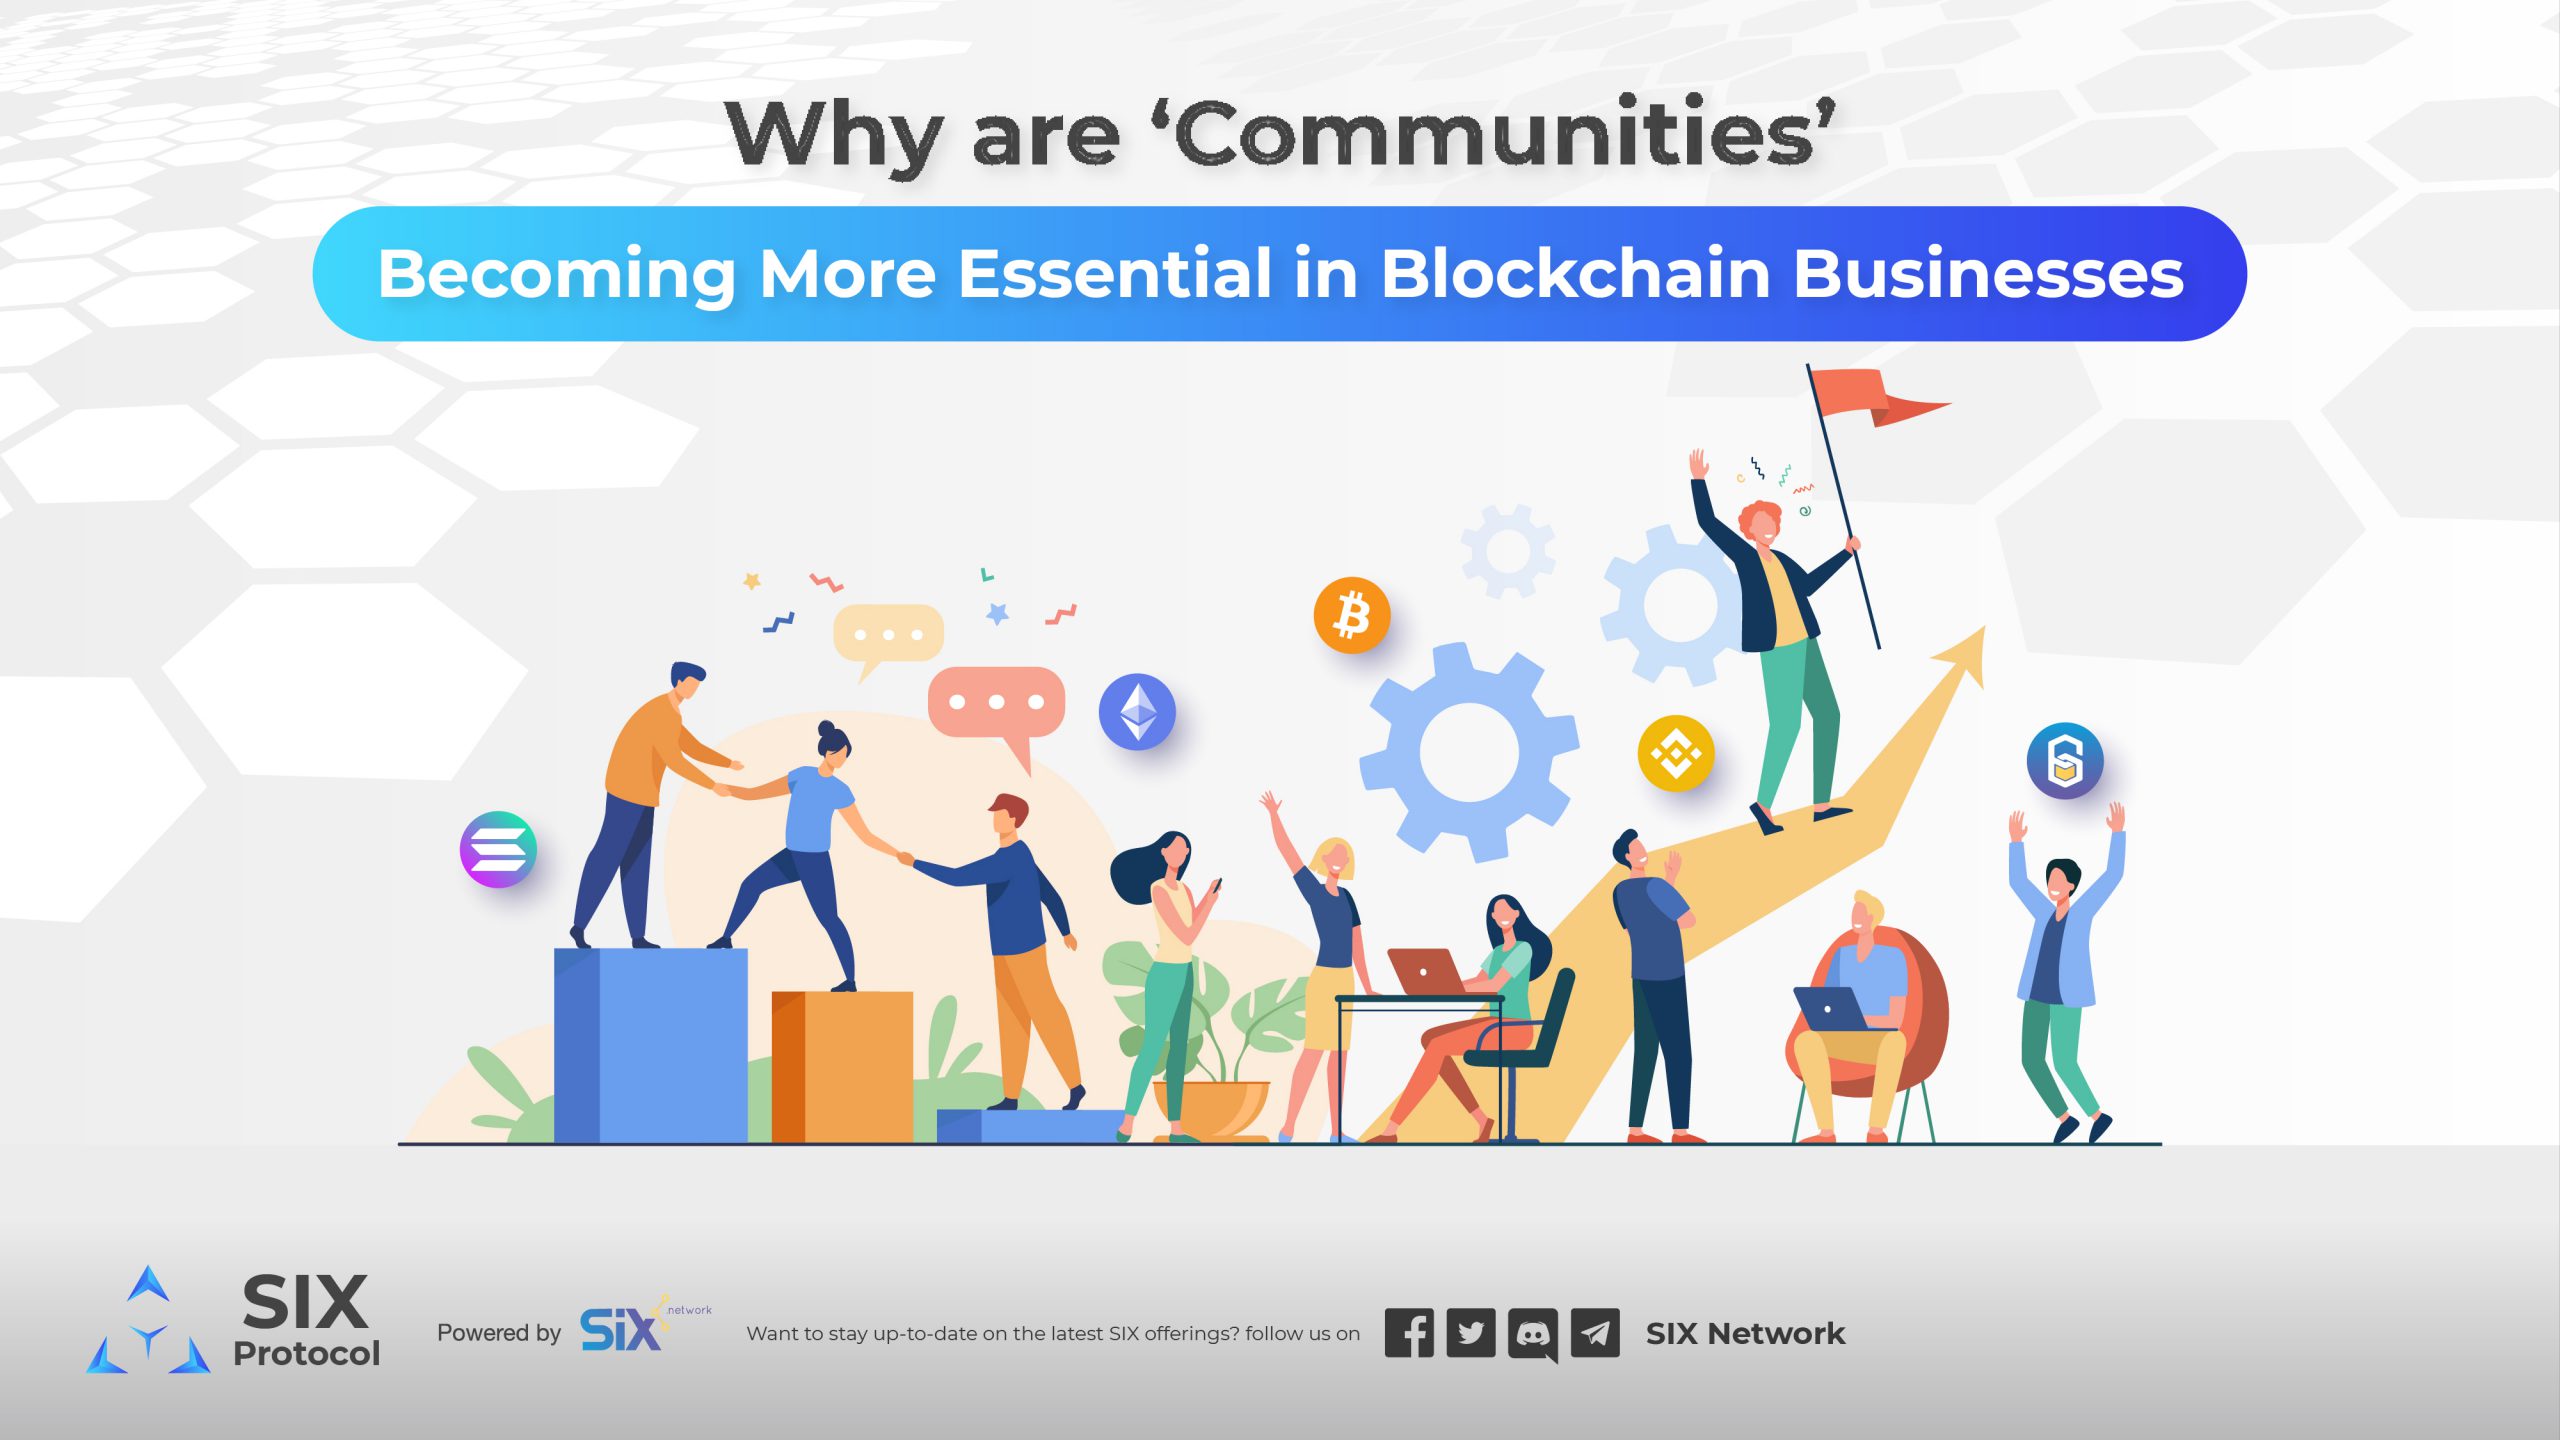 Why are Communities Becoming More Essential in Blockchain Businesses 2022